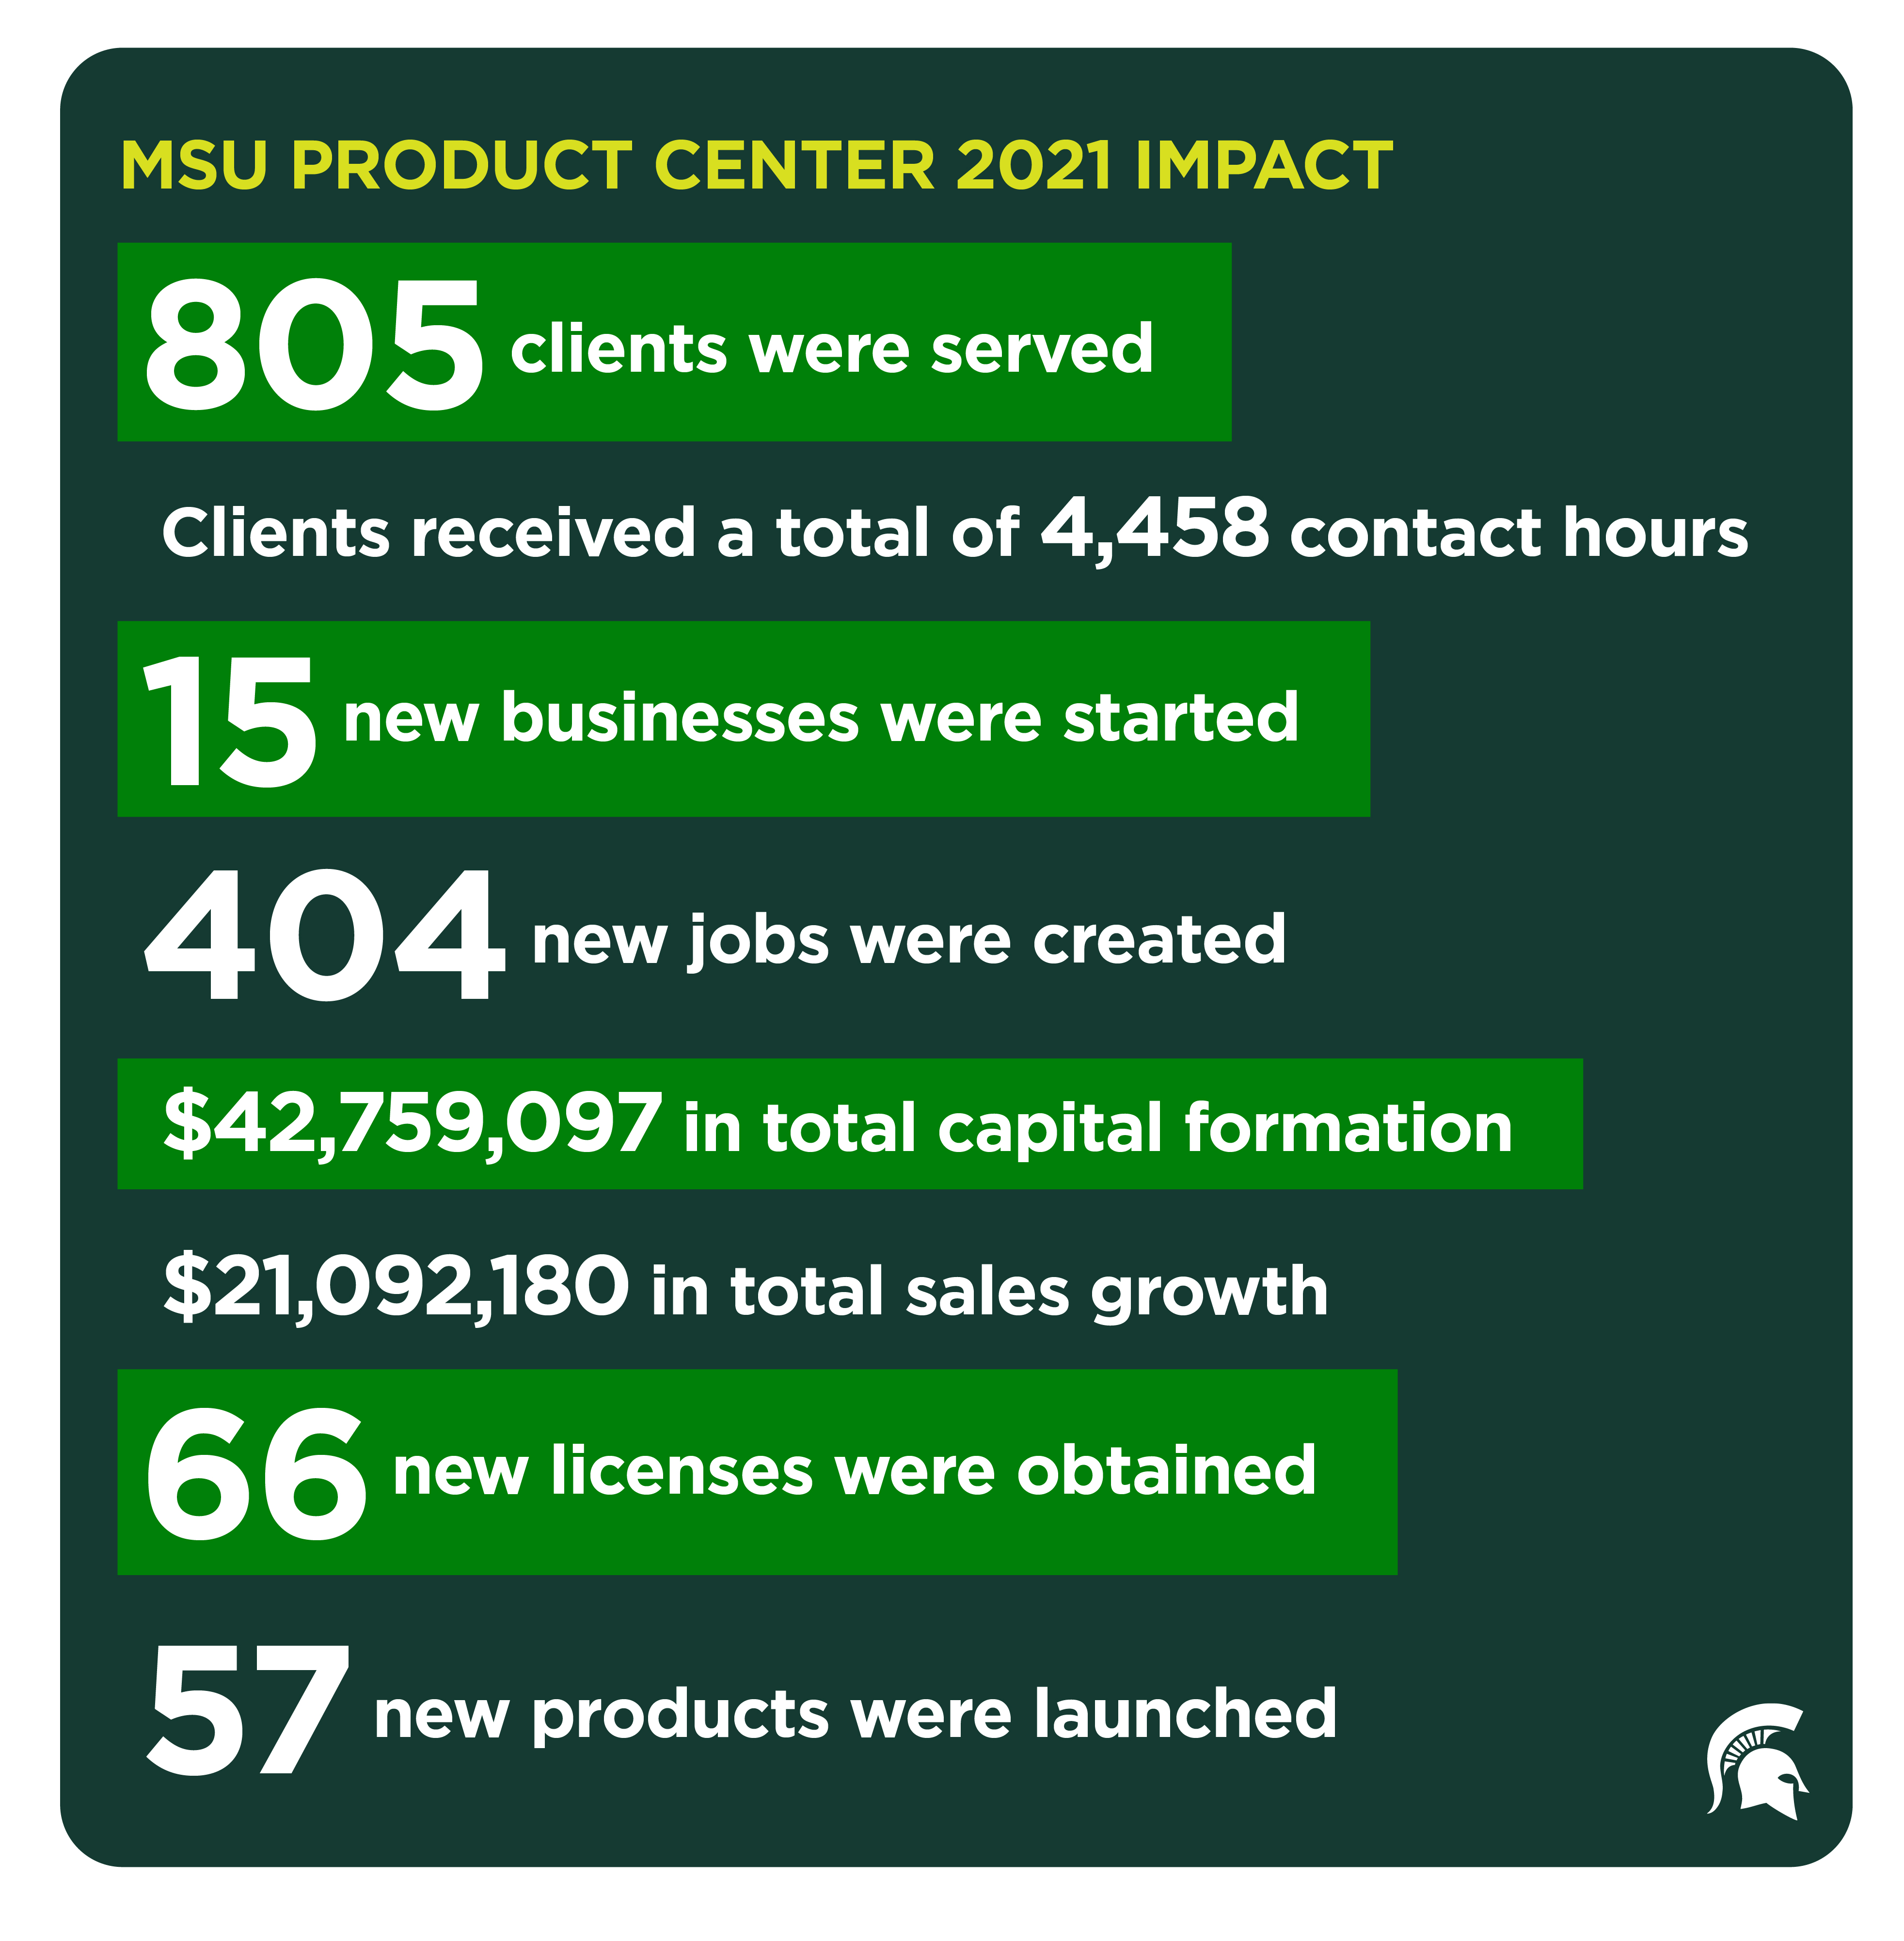 MSU Product Center served more than 800 clients in 2021.